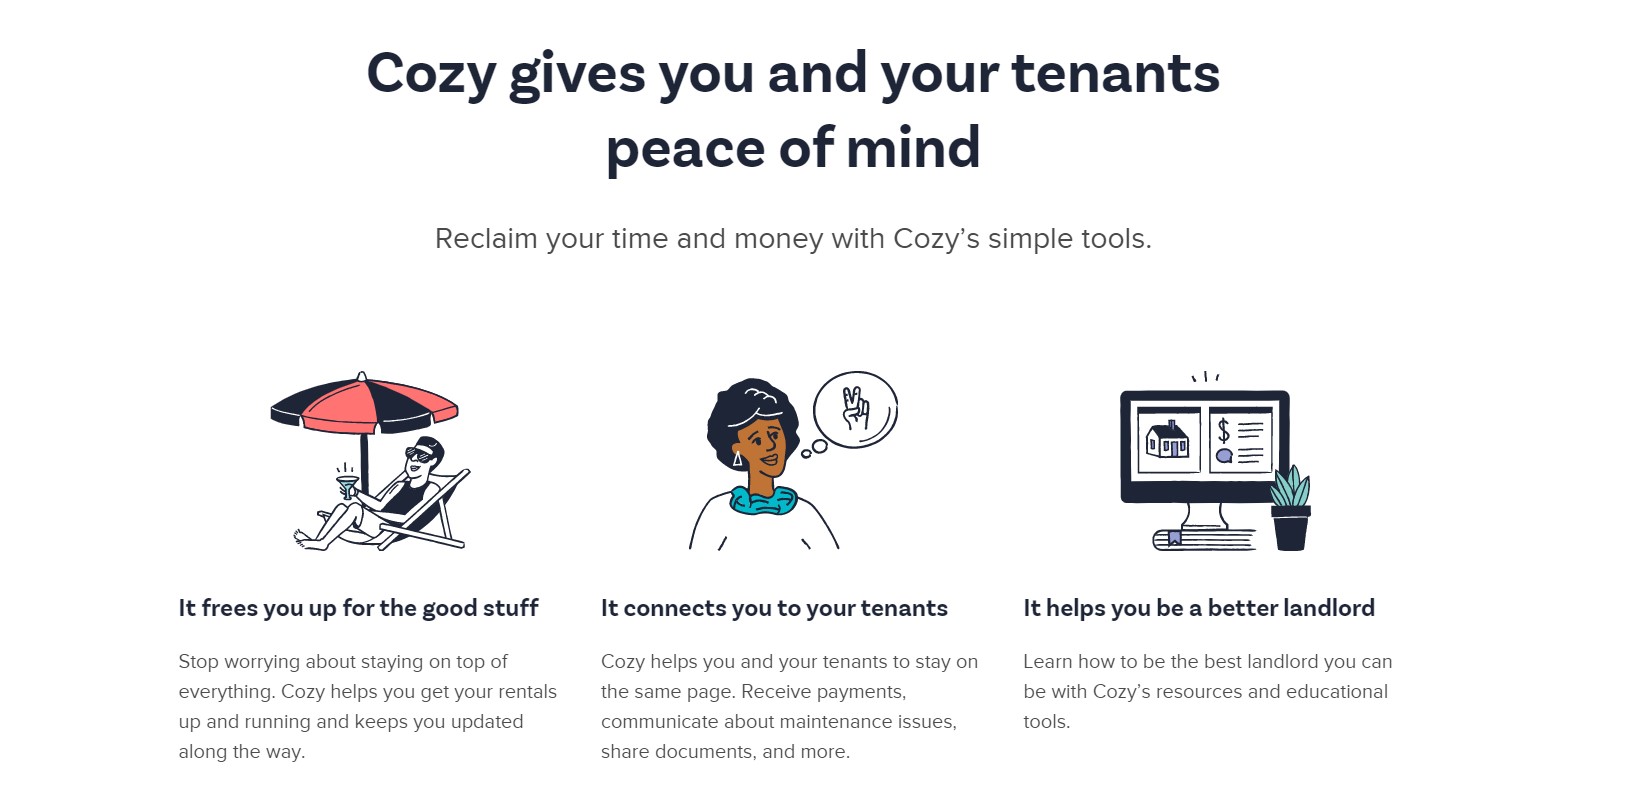 Find detailed information about Cozy